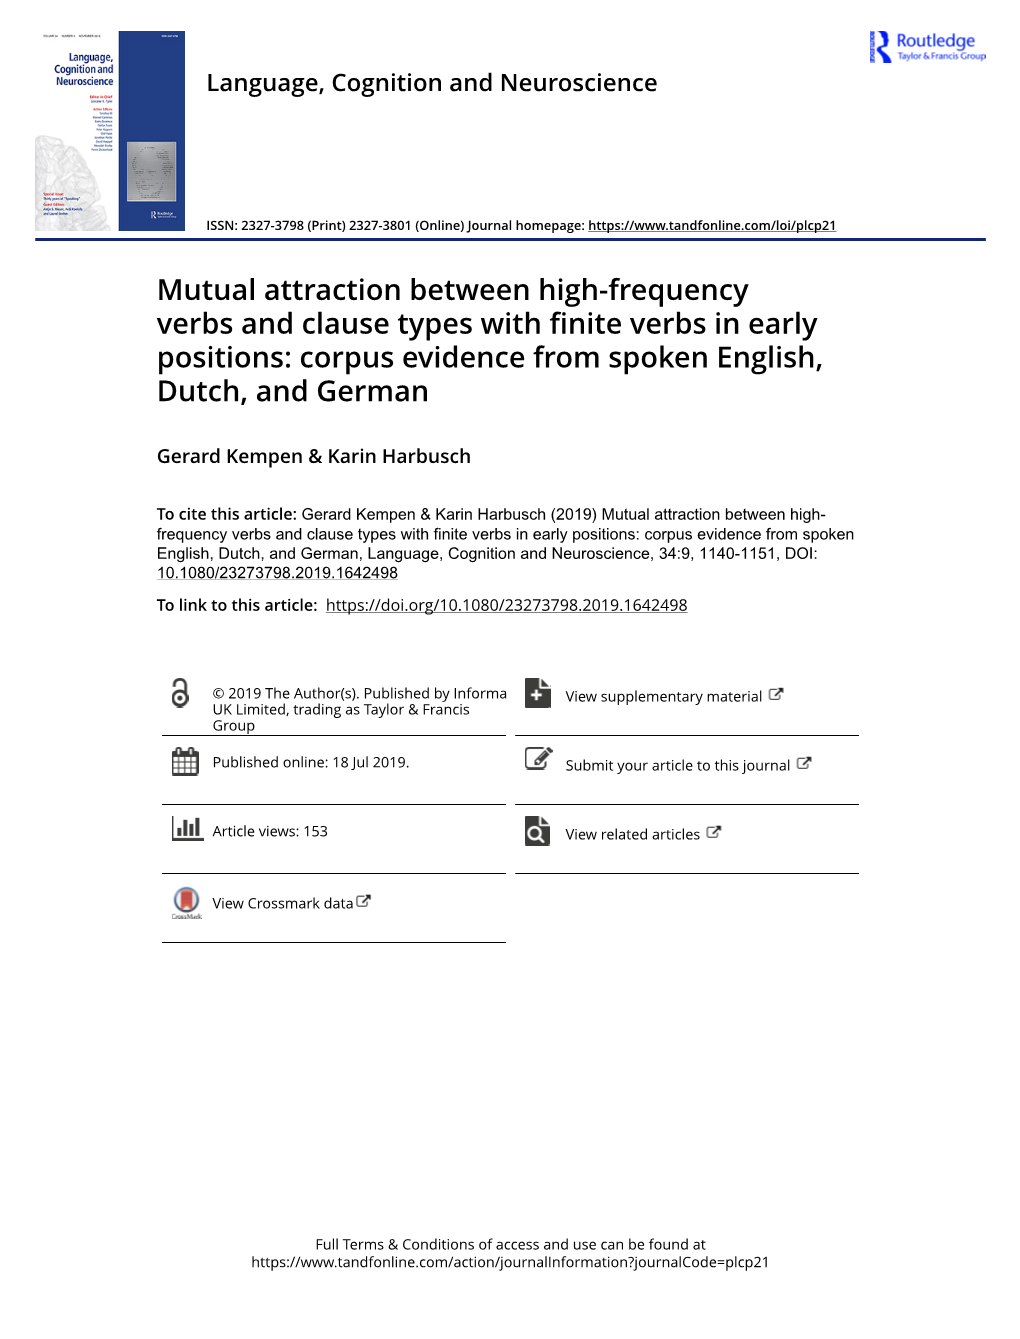 Mutual Attraction Between High-Frequency Verbs and Clause Types with Finite Verbs in Early Positions: Corpus Evidence from Spoken English, Dutch, and German